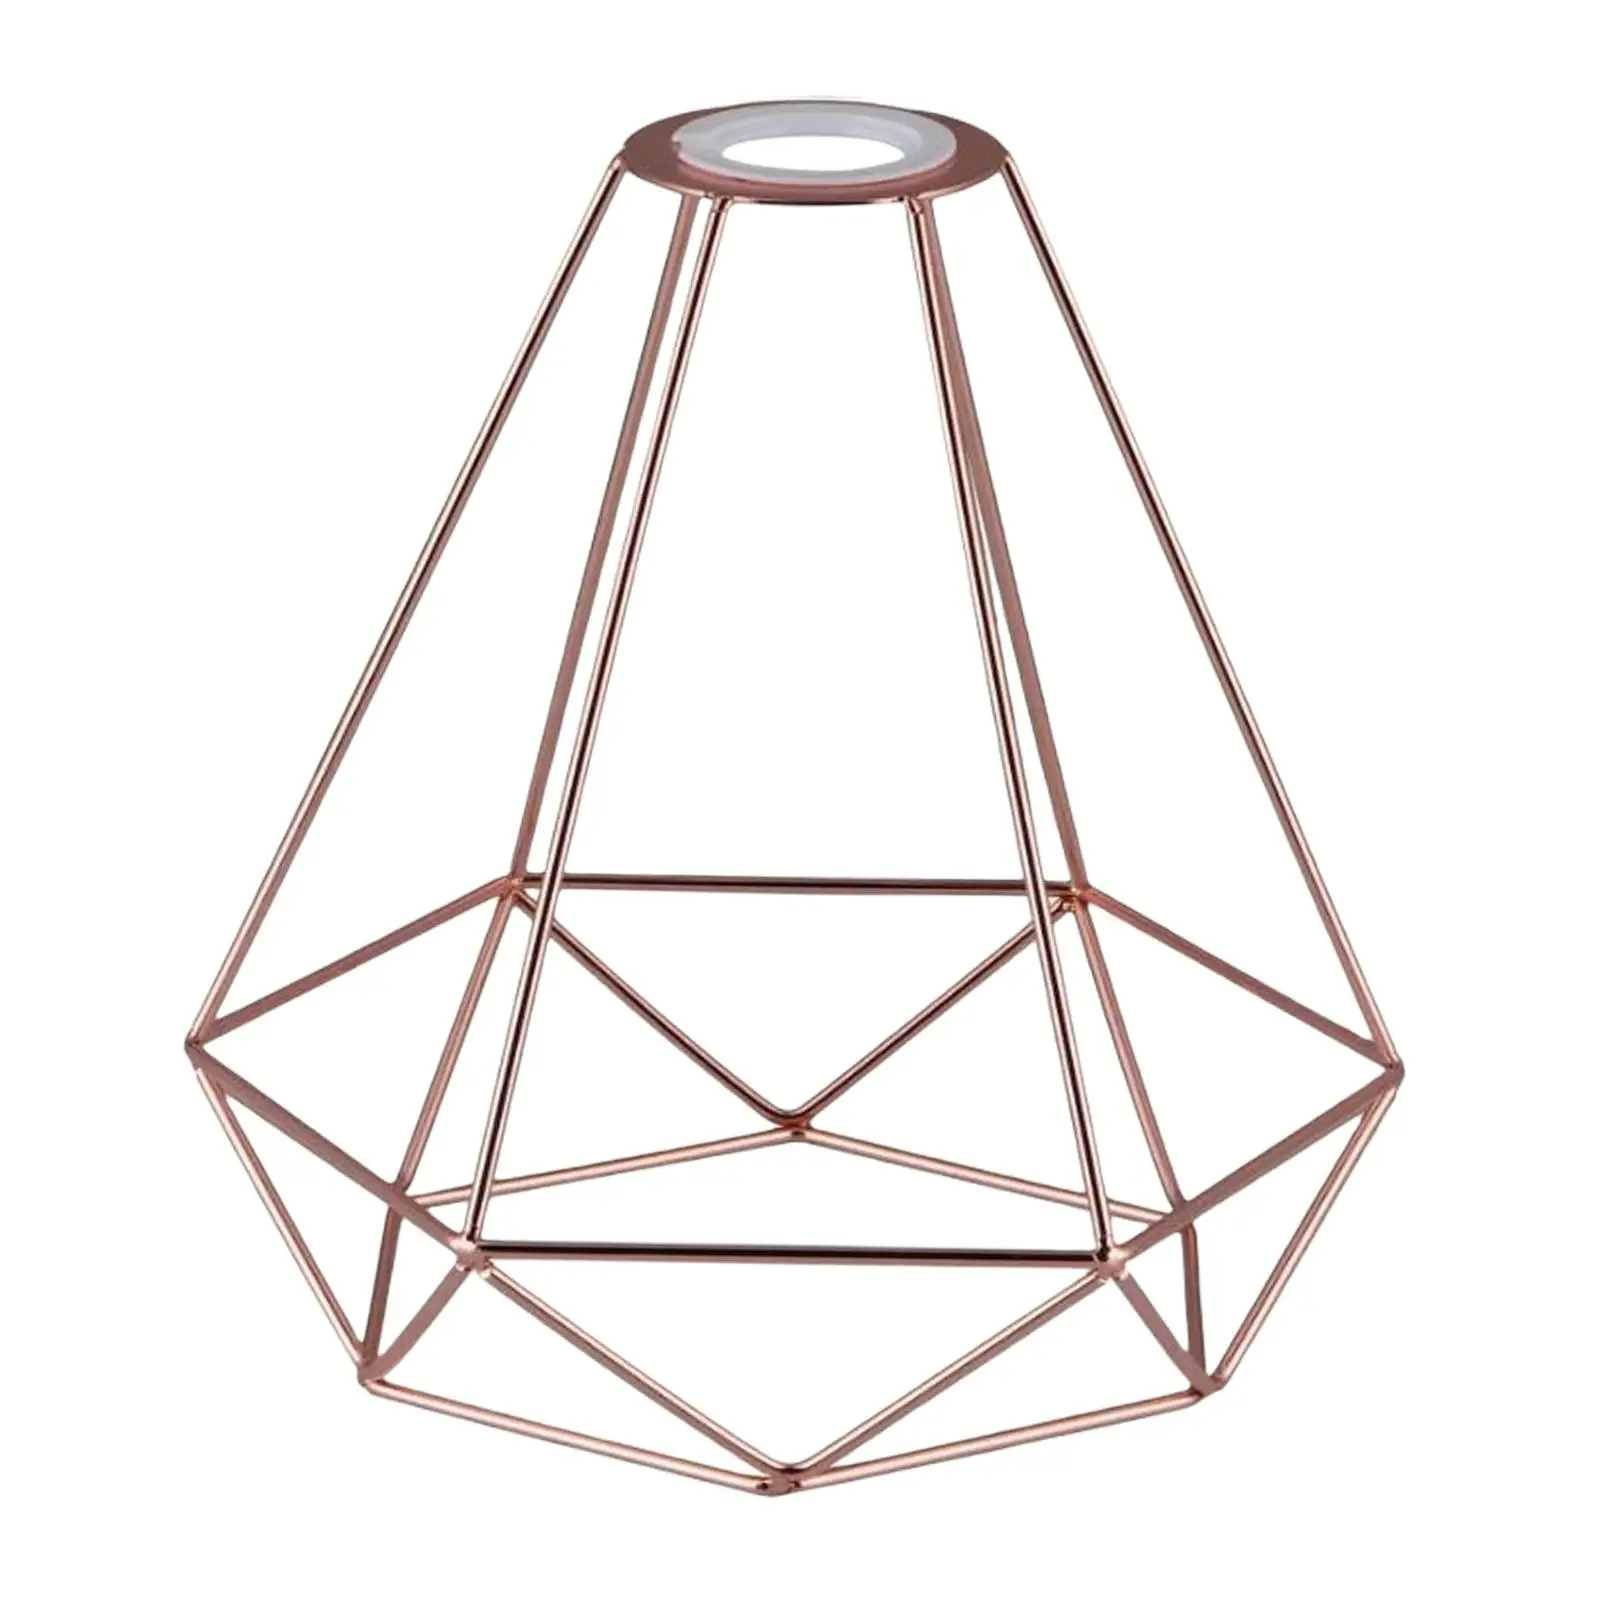 Pendant Lampshade Diamond Shape Decoration Light Bulb Cage Guard Practical Cover Wire Antique Holder for Ceiling Cafe Bedroom